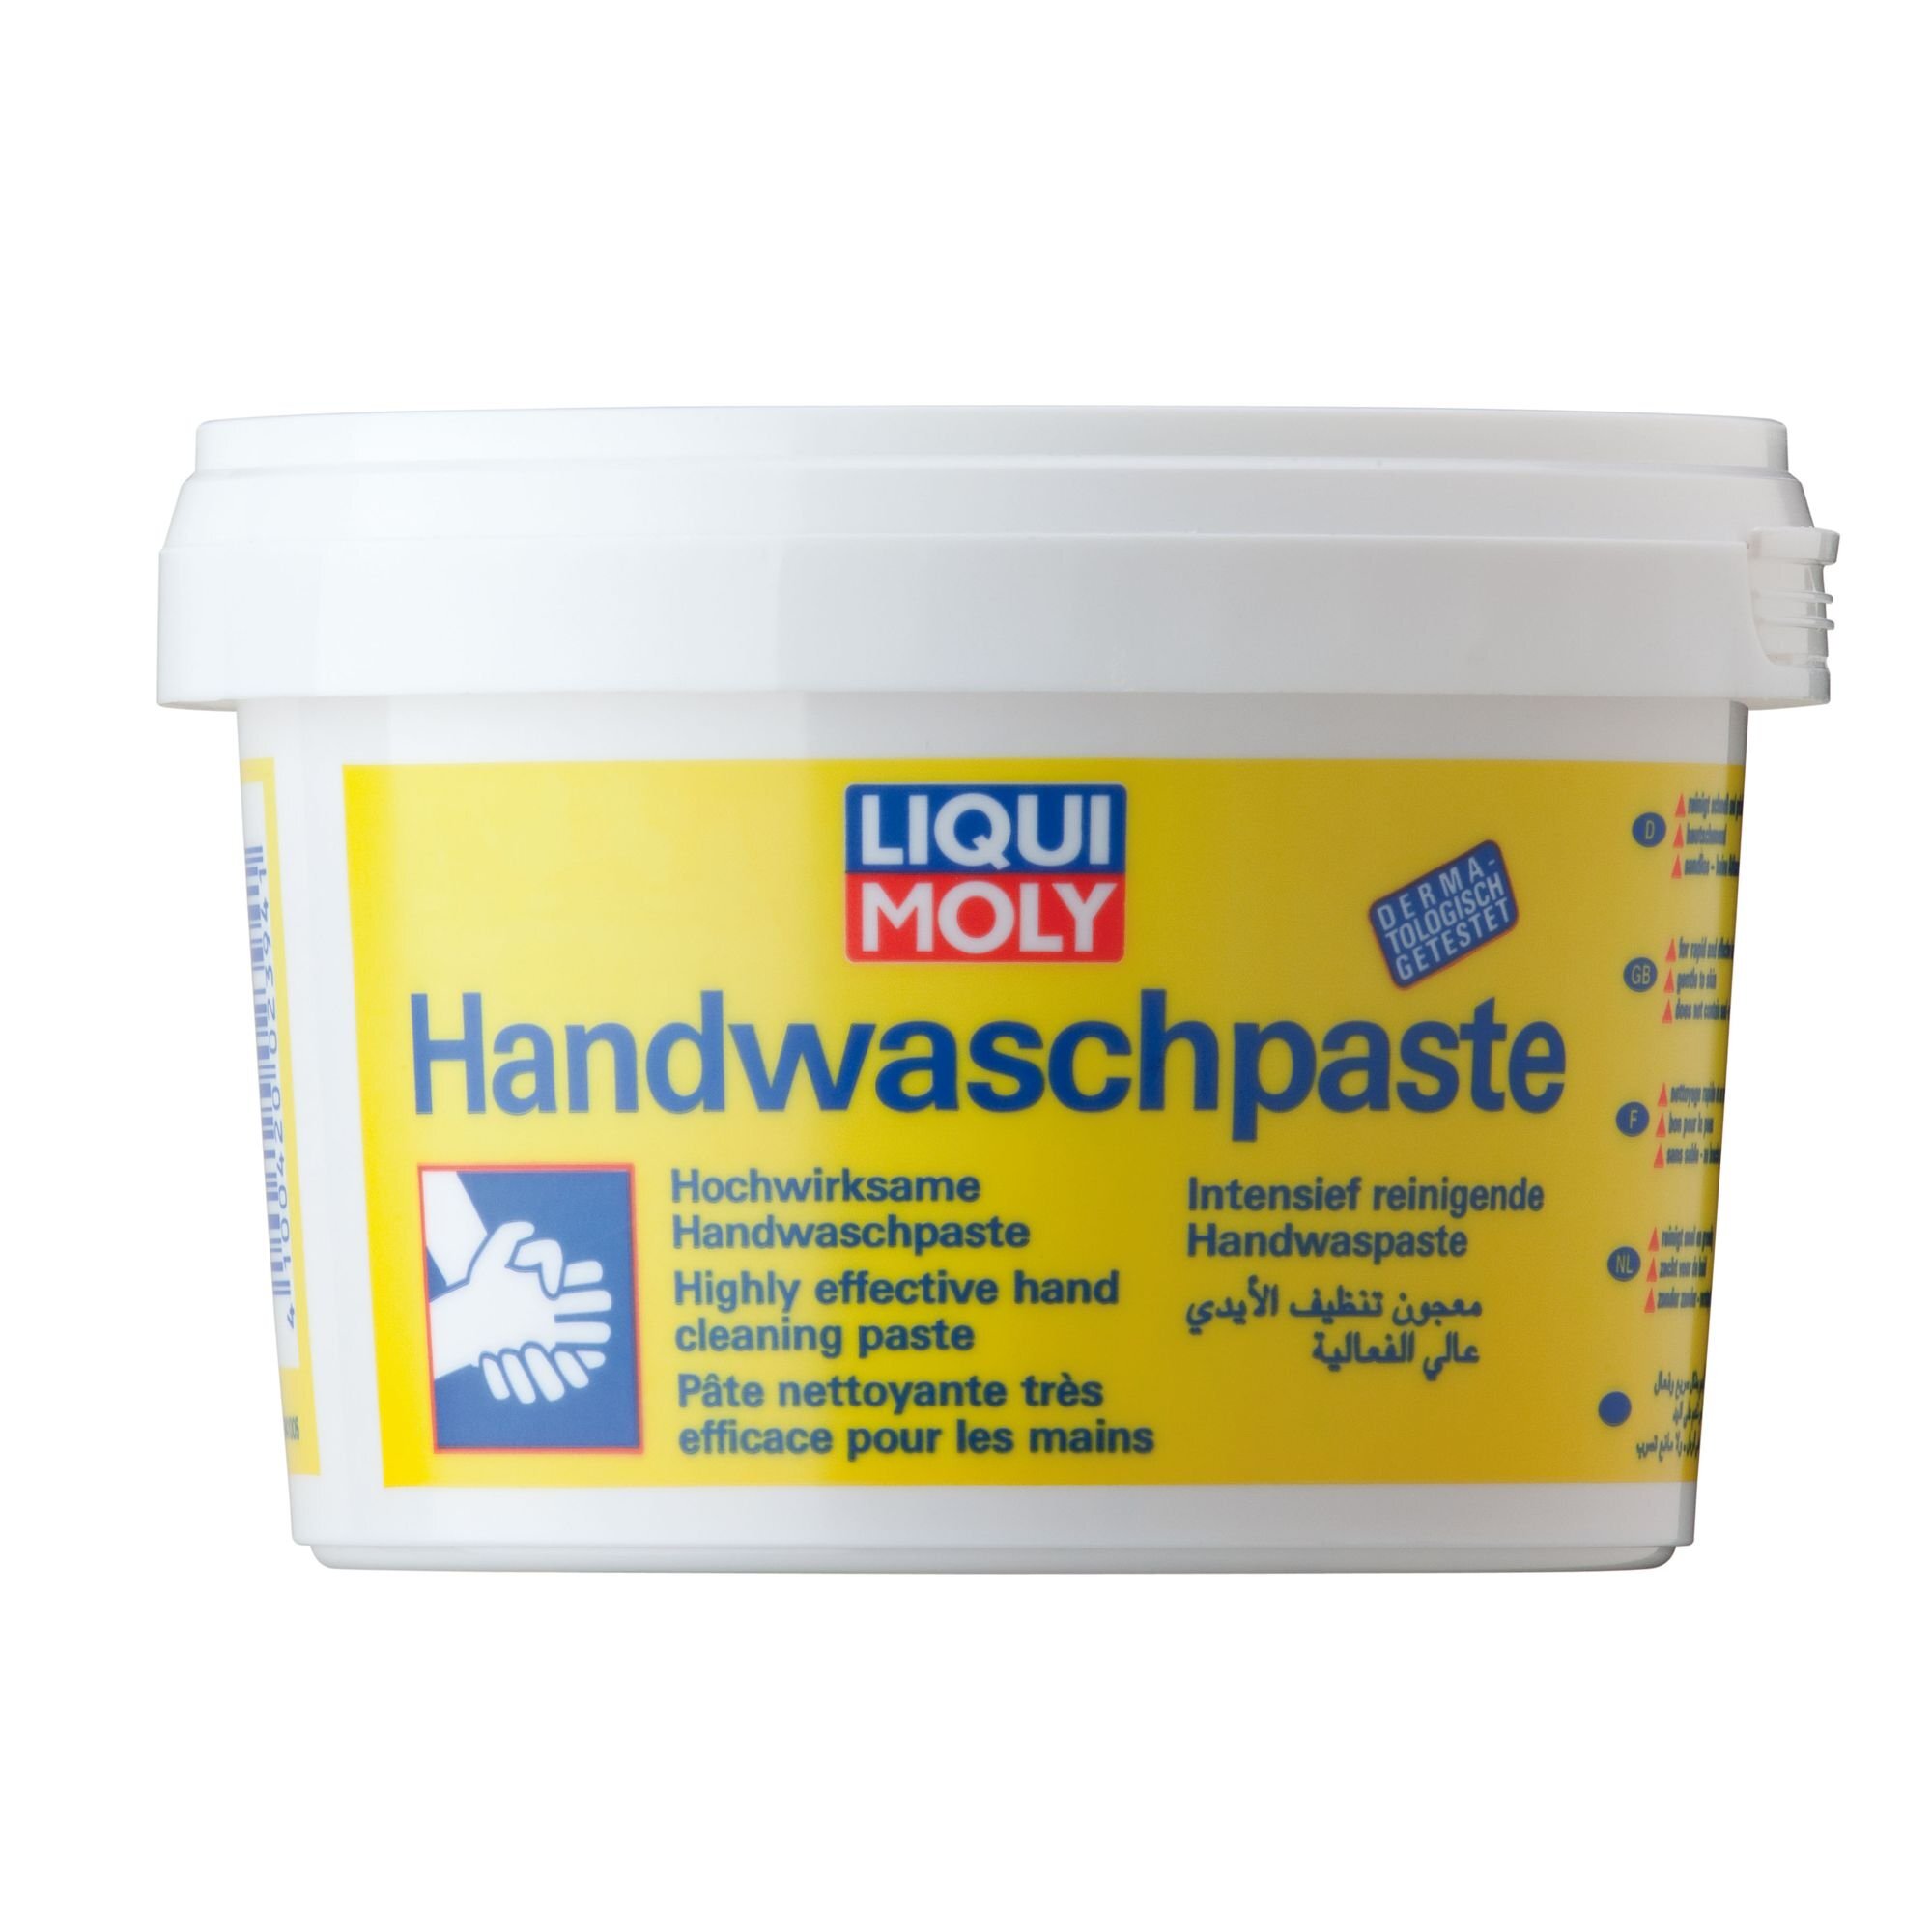 LIQUI MOLY Hand Cleaning Paste 500Ml [2394] :: £5.35 :: Oils, Lubes &  Cleaning :: SPRAYS / LUBRICANTS :: WHATEVERWHEELS LTD - ATV, Motorbike &  Scooter Centre - Lancashire's Best For Quad, Buggy, 50cc & 125cc Motorcycle  and Moped Sale